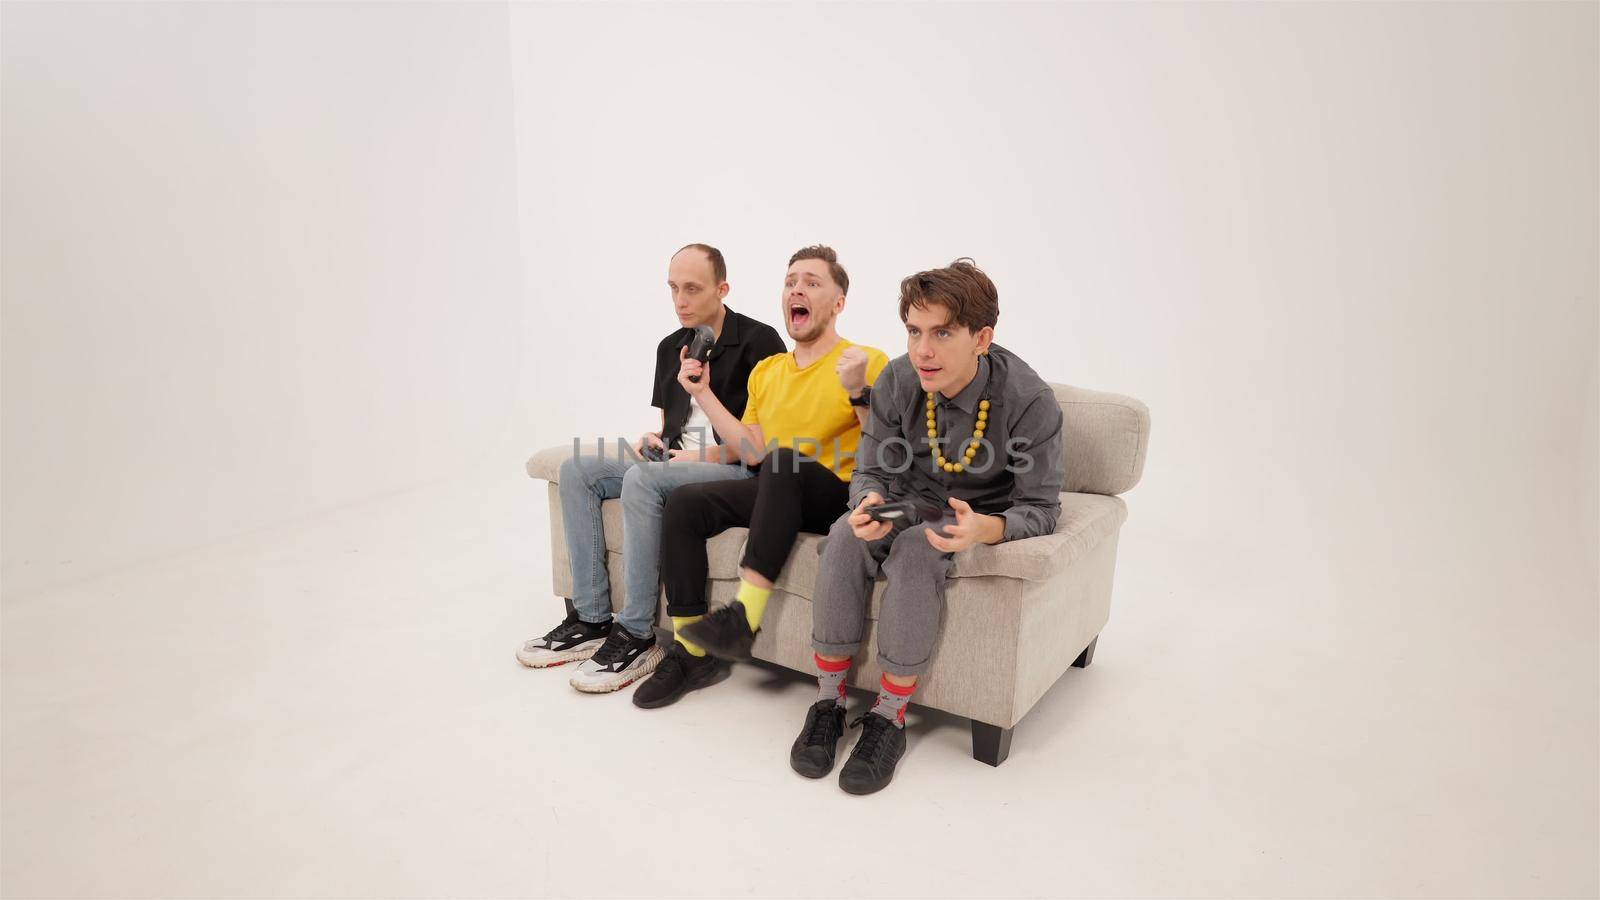 Happy winning while gaming guy in yellow shirt playing video games with friends sitting on a white sofa isolated on white background. Guy reacts to winning or a lose. Gaming concept. 4K footage by LipikStockMedia